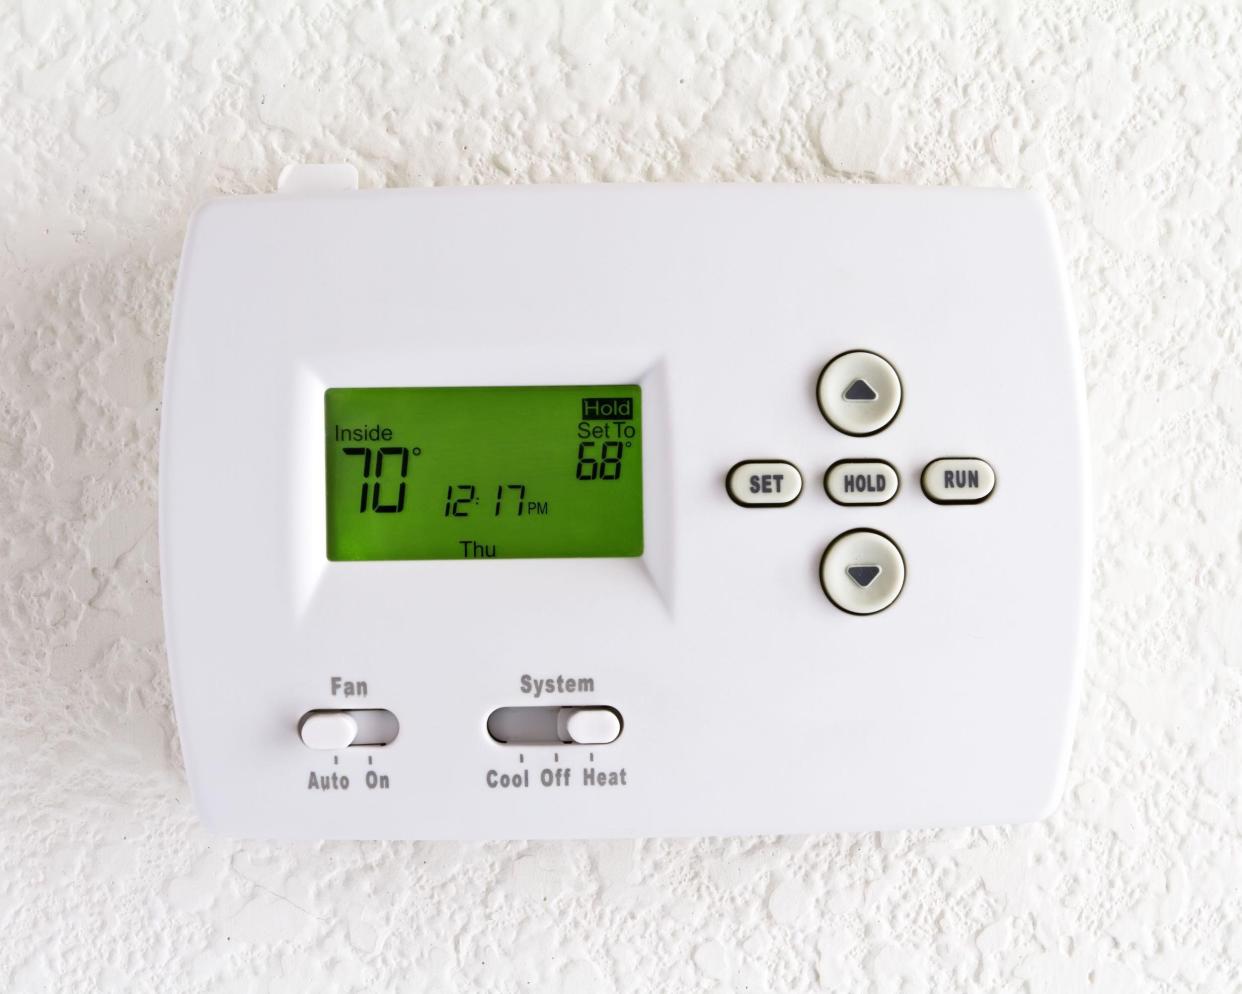 digital thermostat on white wall